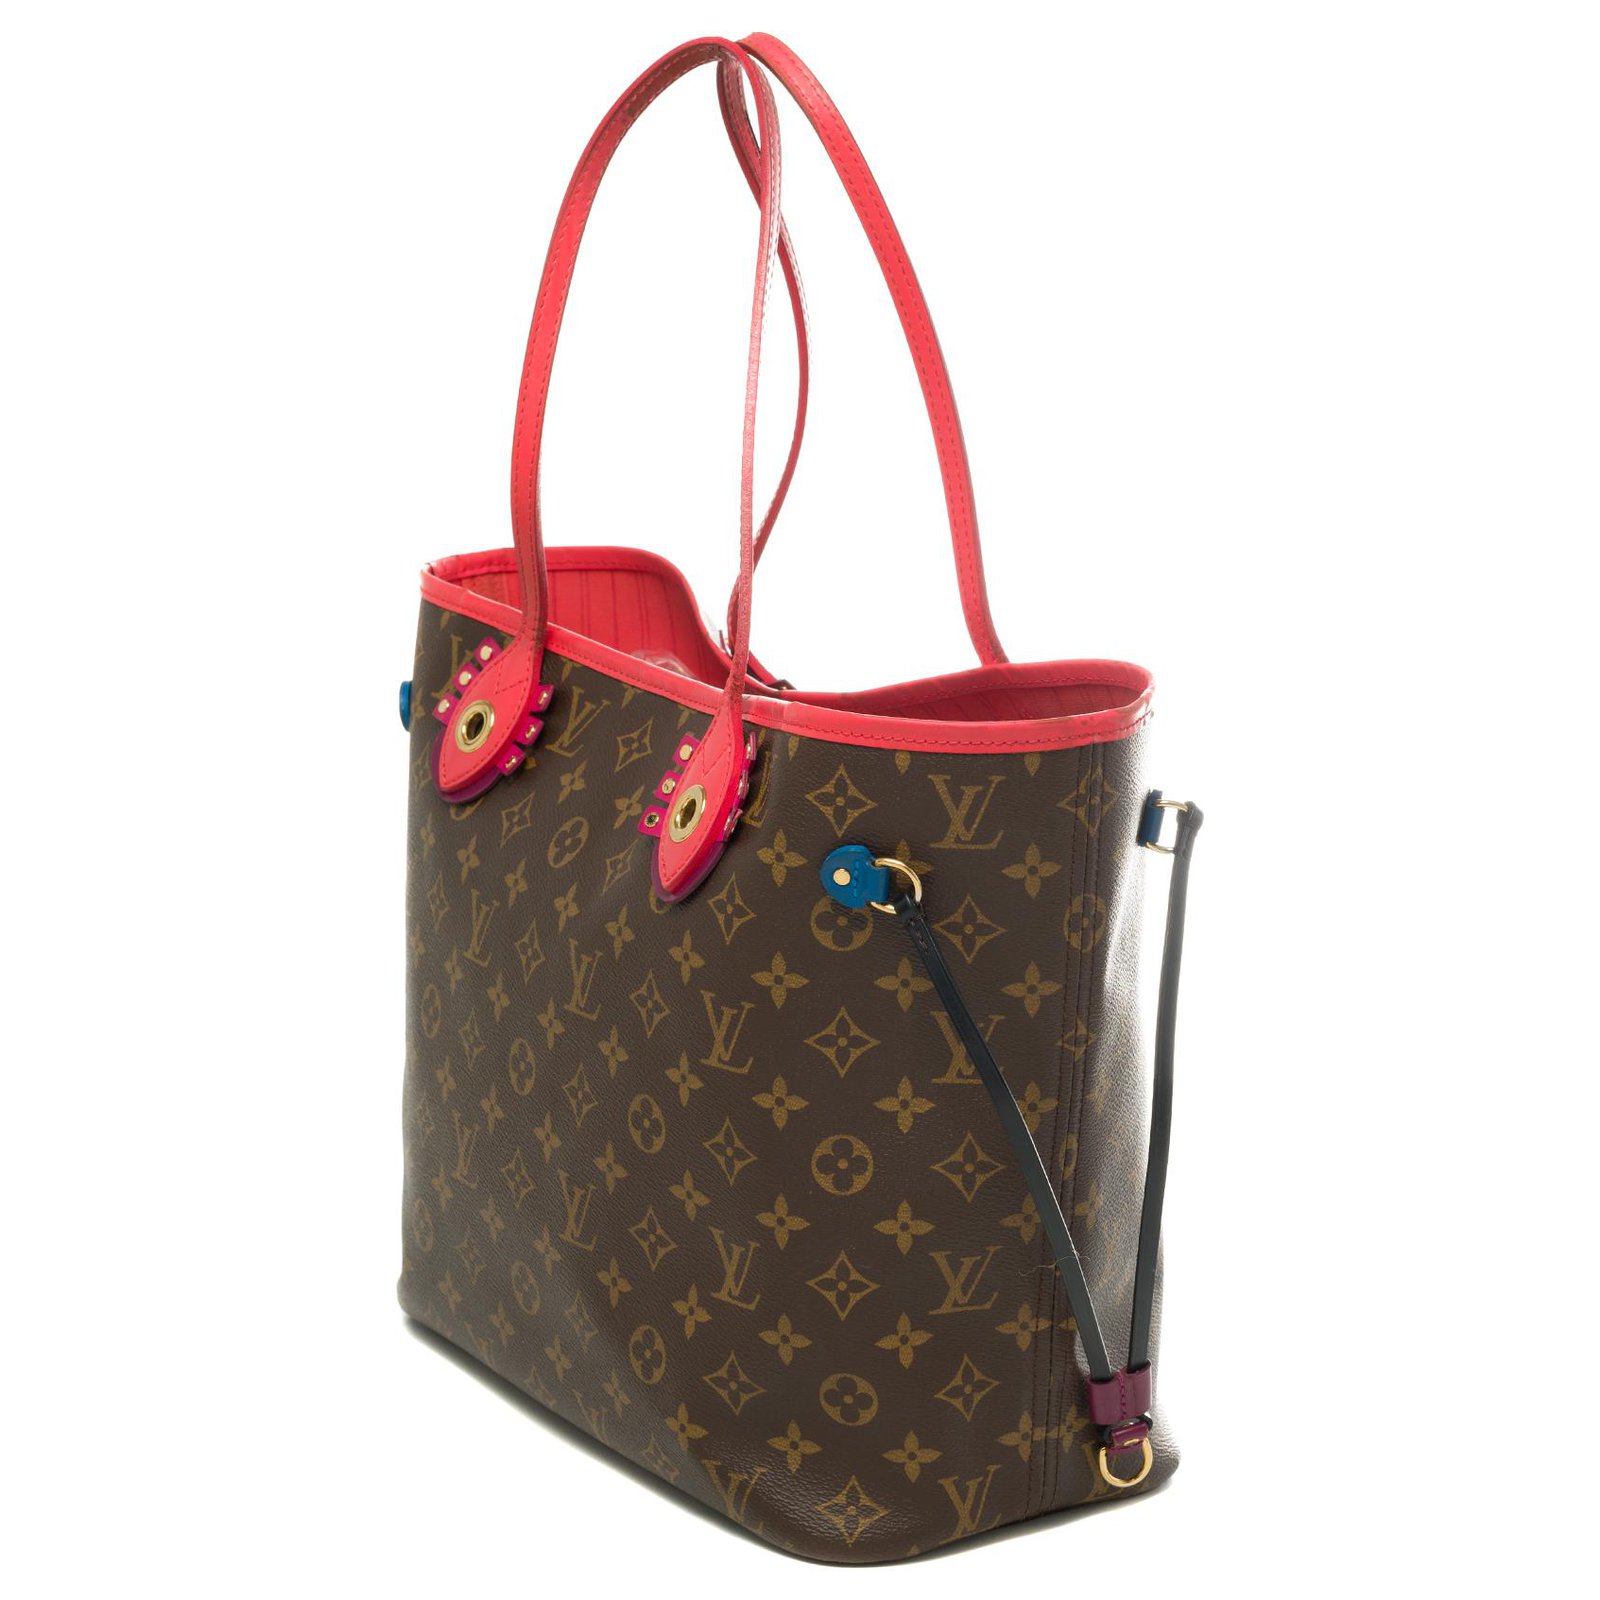 Limited edition Totem / Louis Vuitton Neverfull MM tote bag in